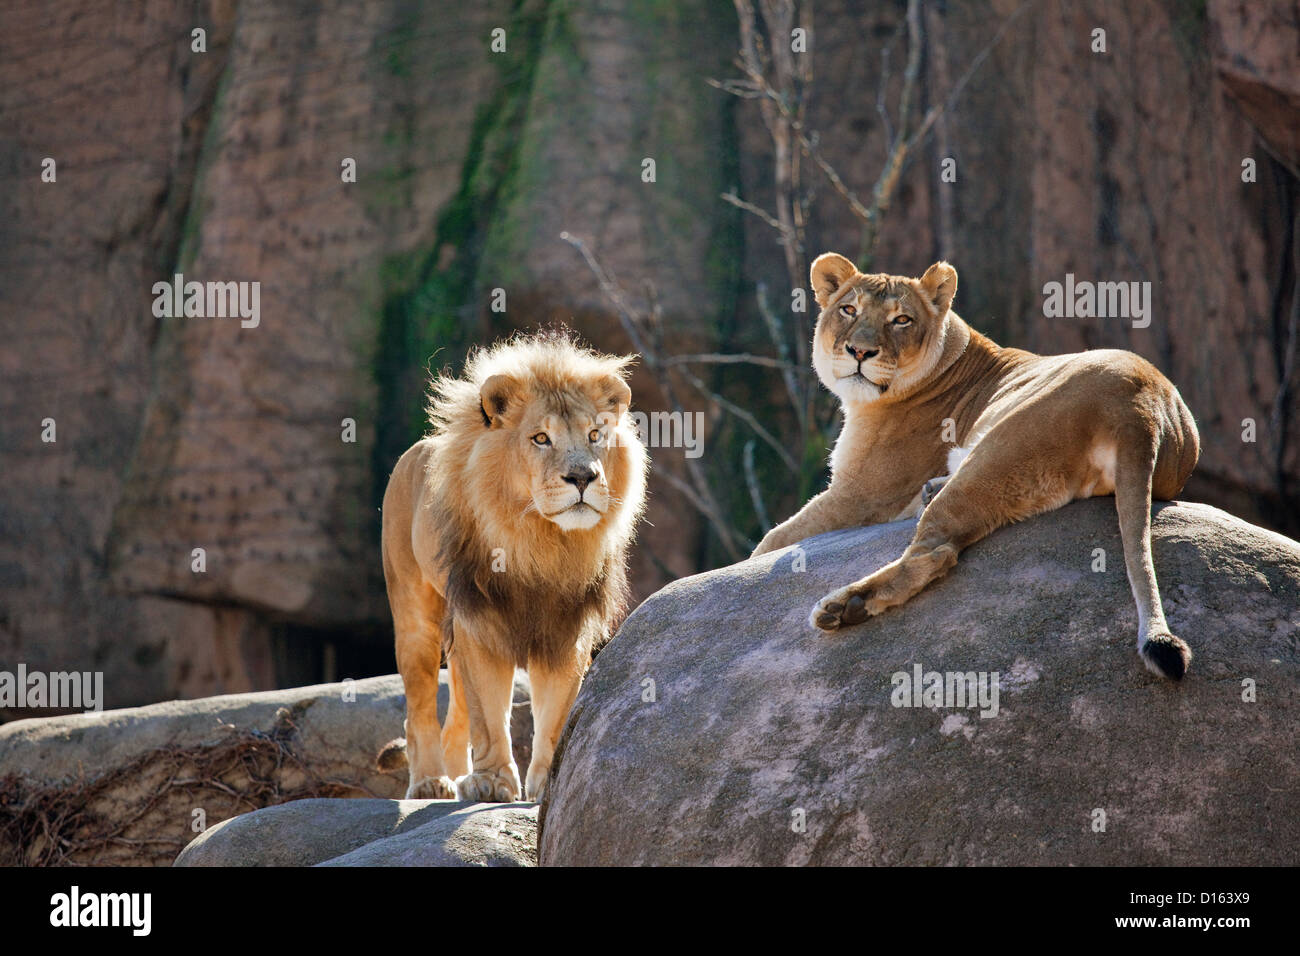 Lions in Captivity, Chicago Zoo Stock Photo